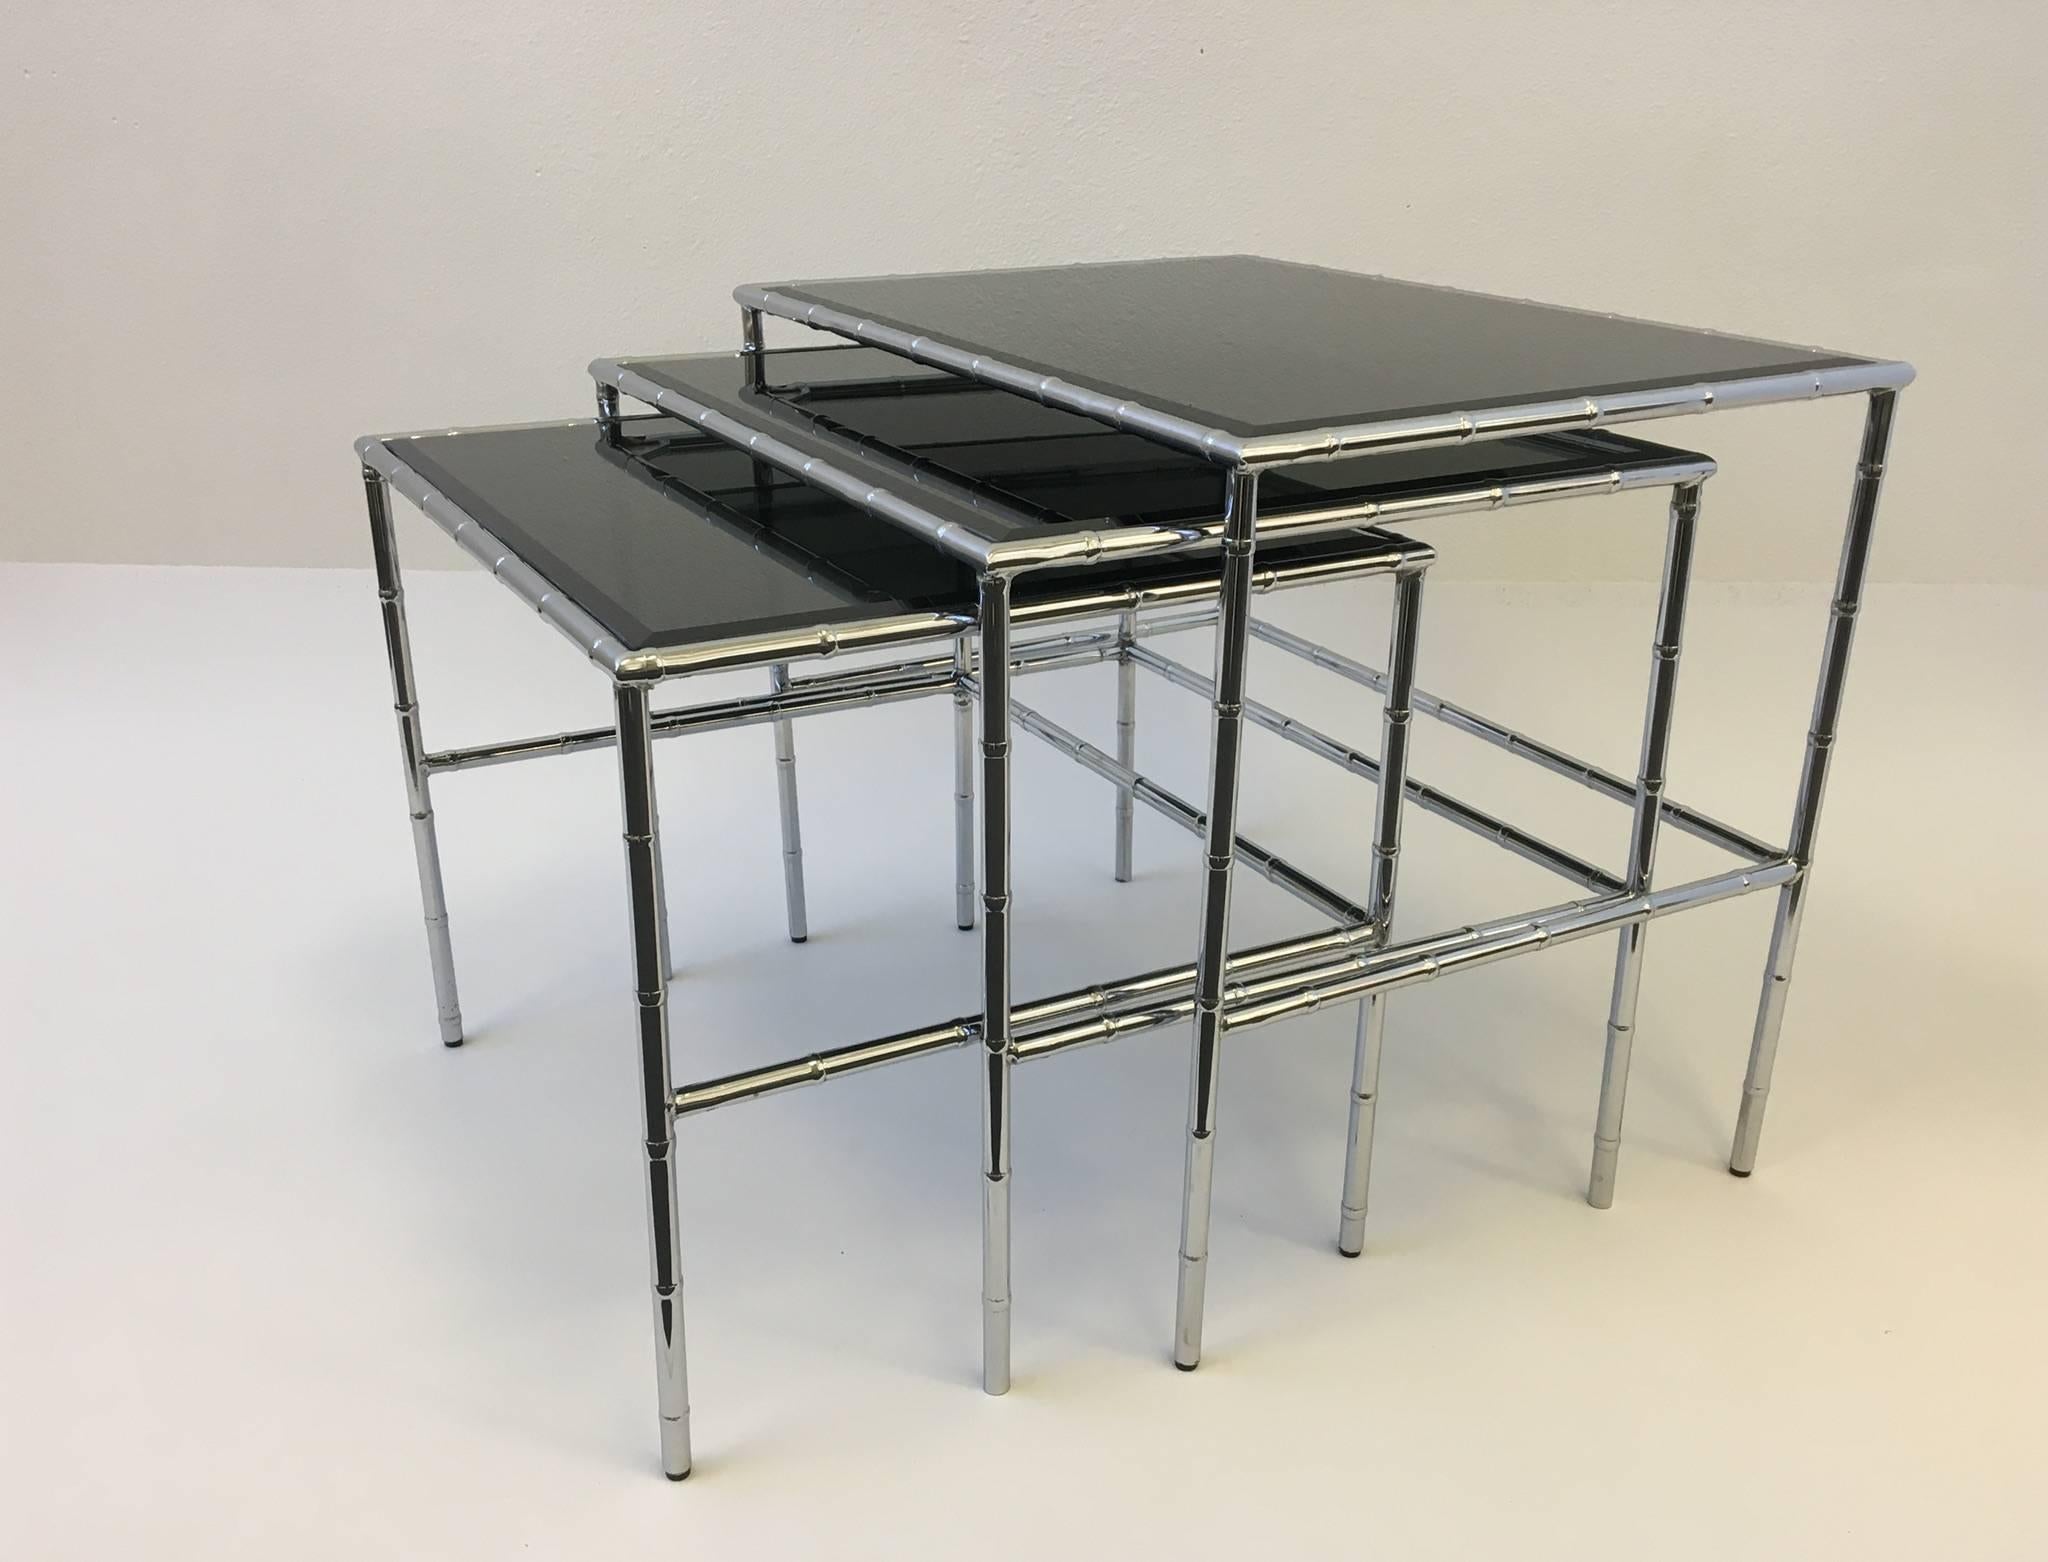 A set of three glamorous chrome and bevelled smoked glass nesting tables from the 1970s. The design of the frames are a faux bamboo with a polished chrome finish. The smoked bevelled glass top are new. 

Dimensions: Large: 20.25